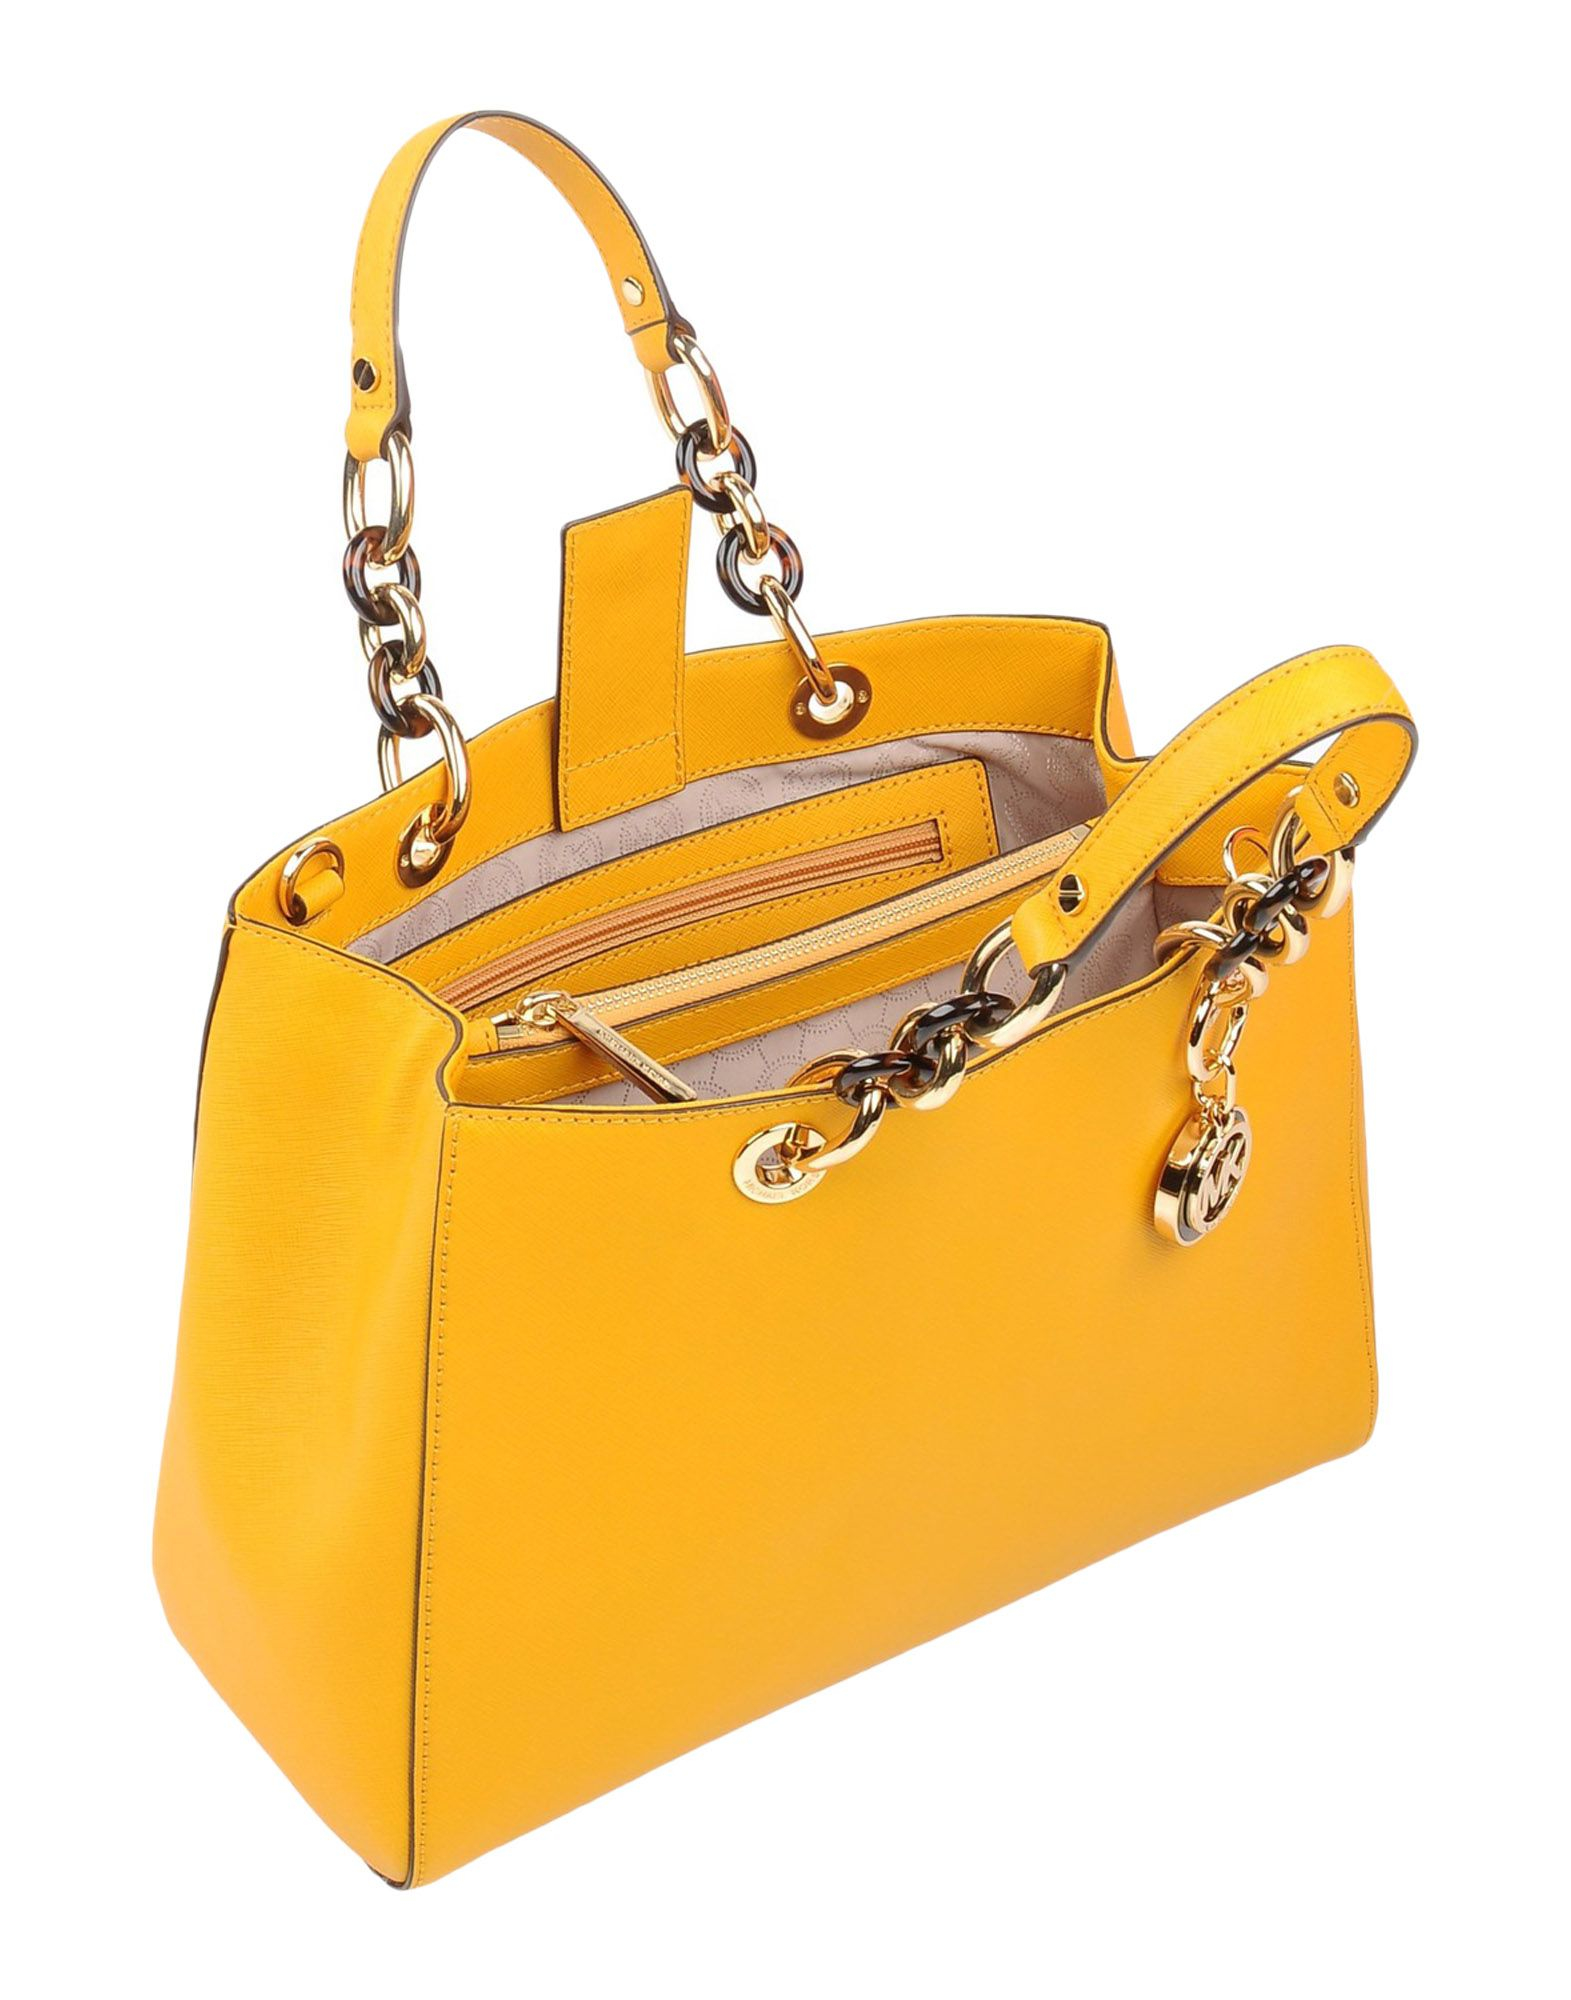 Yellow Handbags & Spring Purse Trends for 2021 | ICONIC LIFE